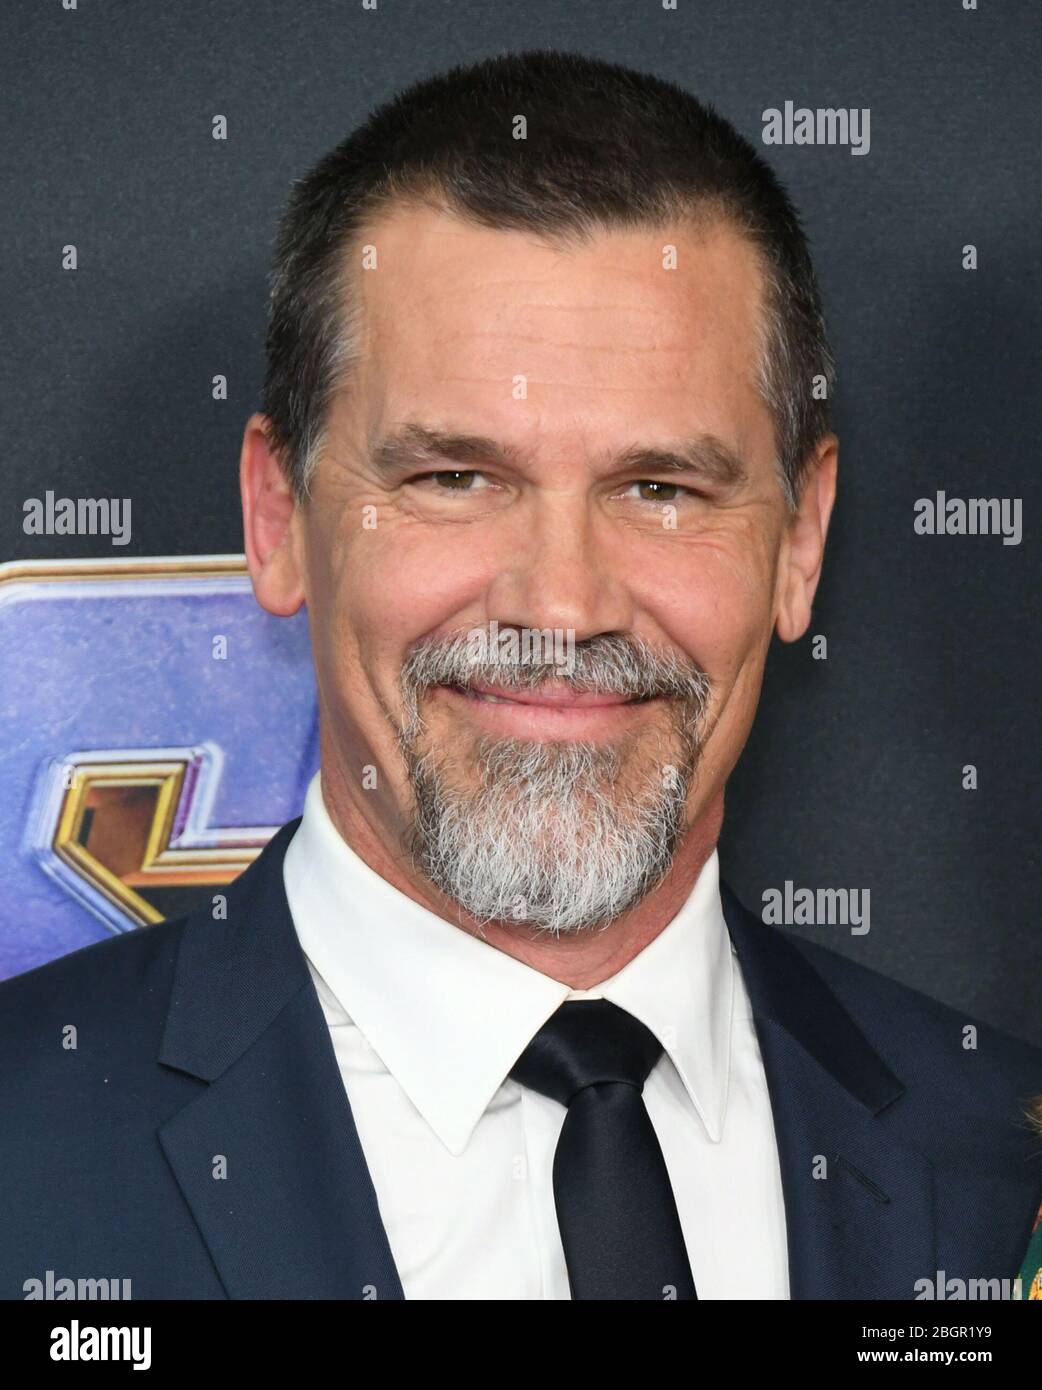 April 22, 2020: FILE: JOSH BROLIN says visiting his father, James Brolin,  and his stepmother Barbra Streisand during the pandemic lock down was  ''irresponsible.'' The ''Avengers: Endgame'' star posted a video over